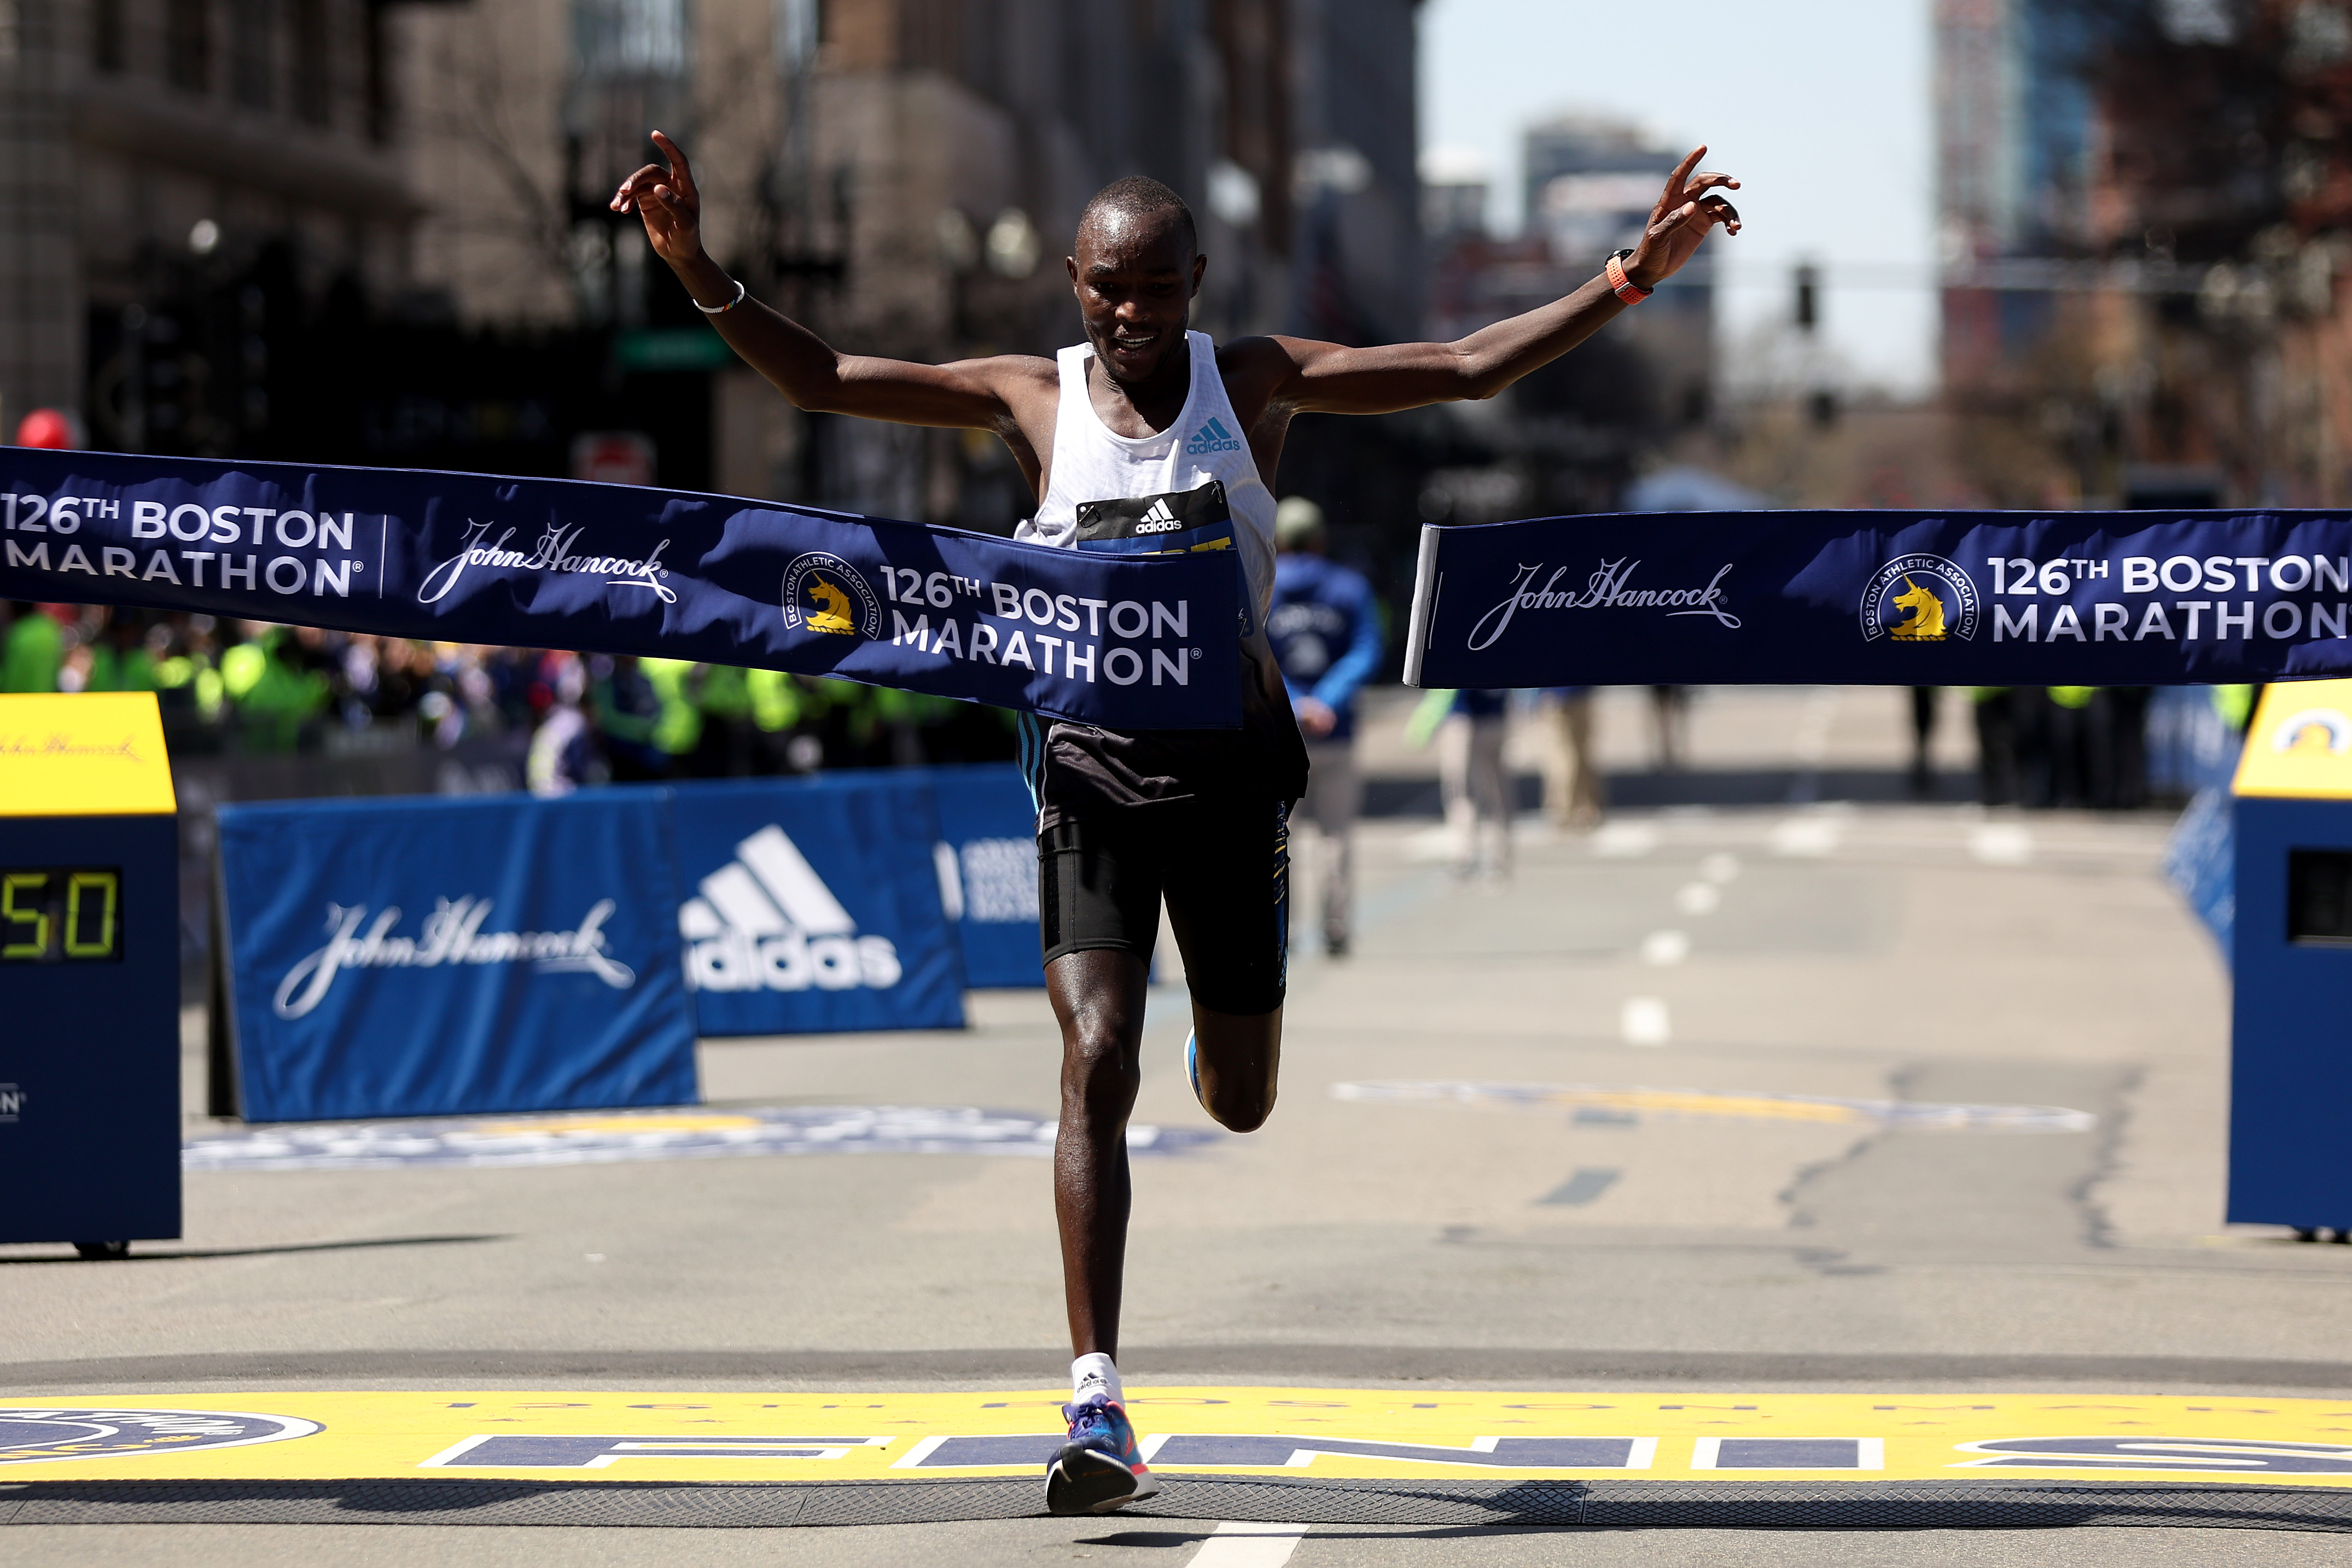 Evans Chebet of Kenya crosses the finish line to take first place in the professional men’s division during the 126th Boston Marathon on April 18, 2022 in Boston, Massachusetts.